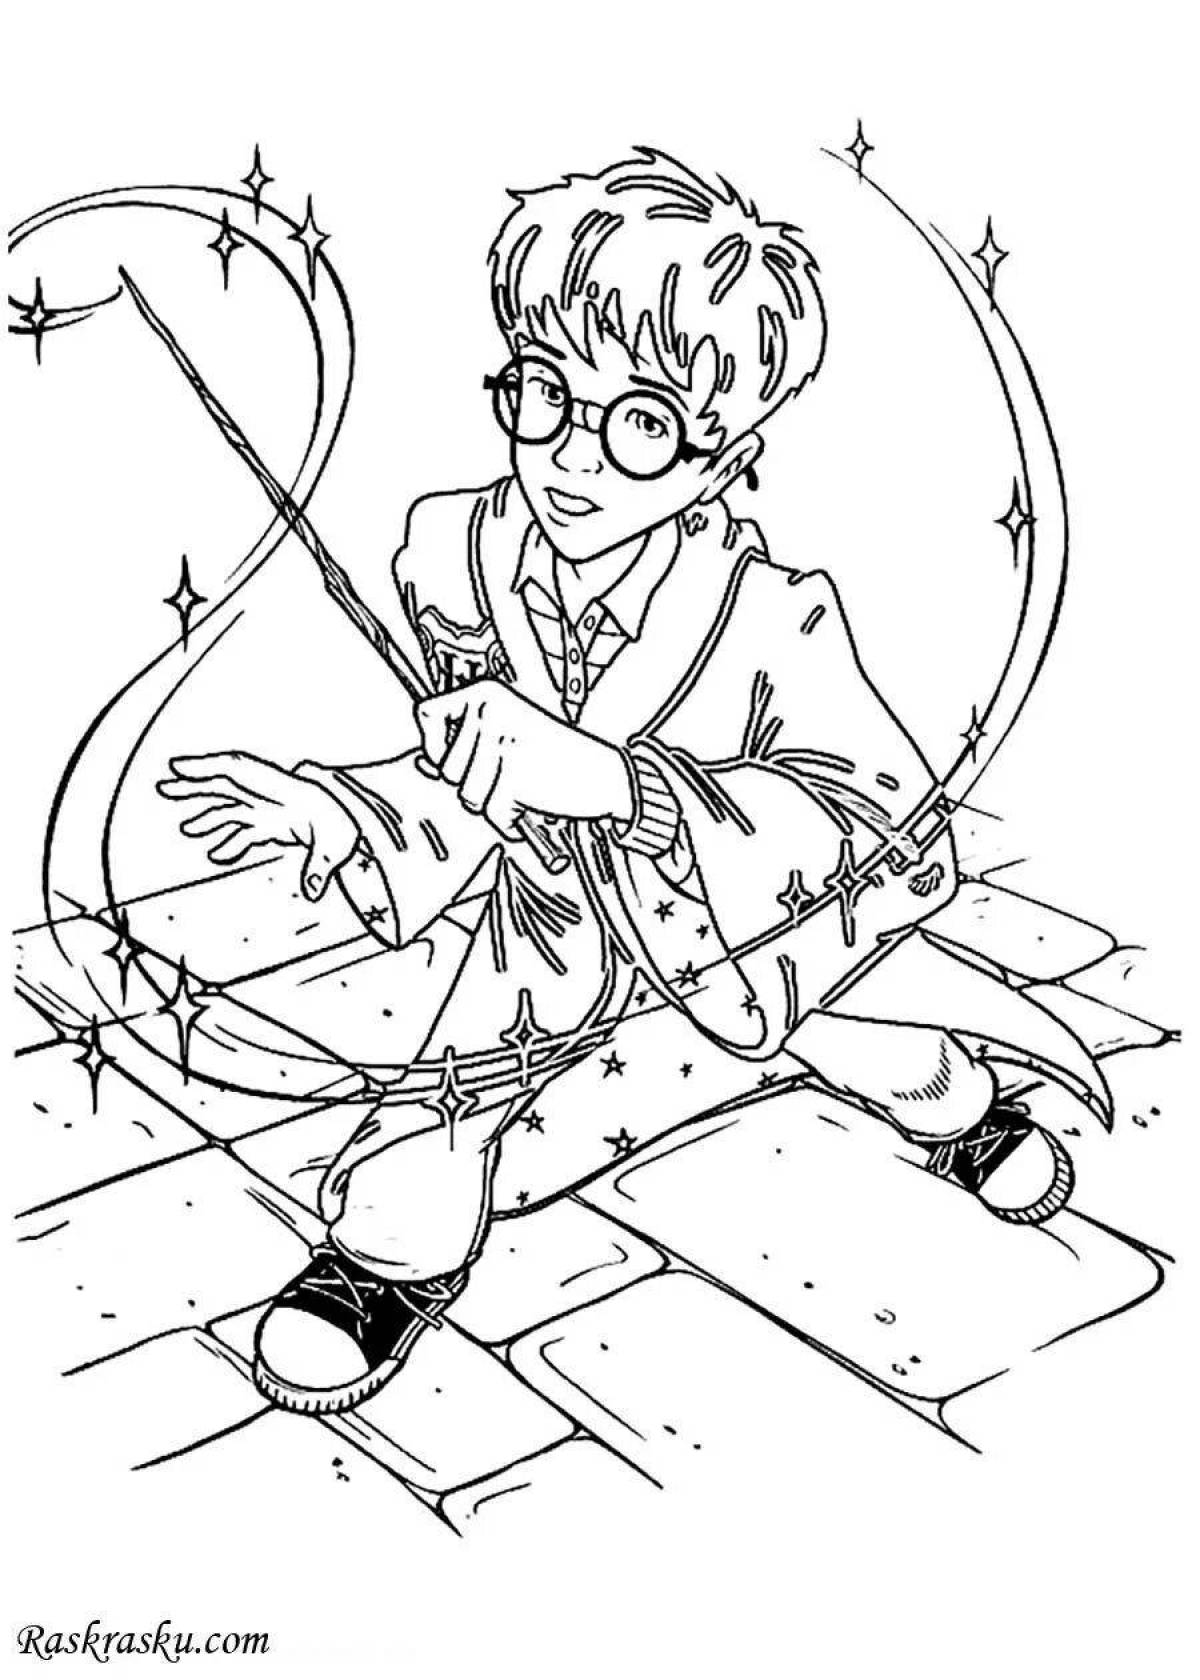 Harry Potter Magic Wand Coloring Page